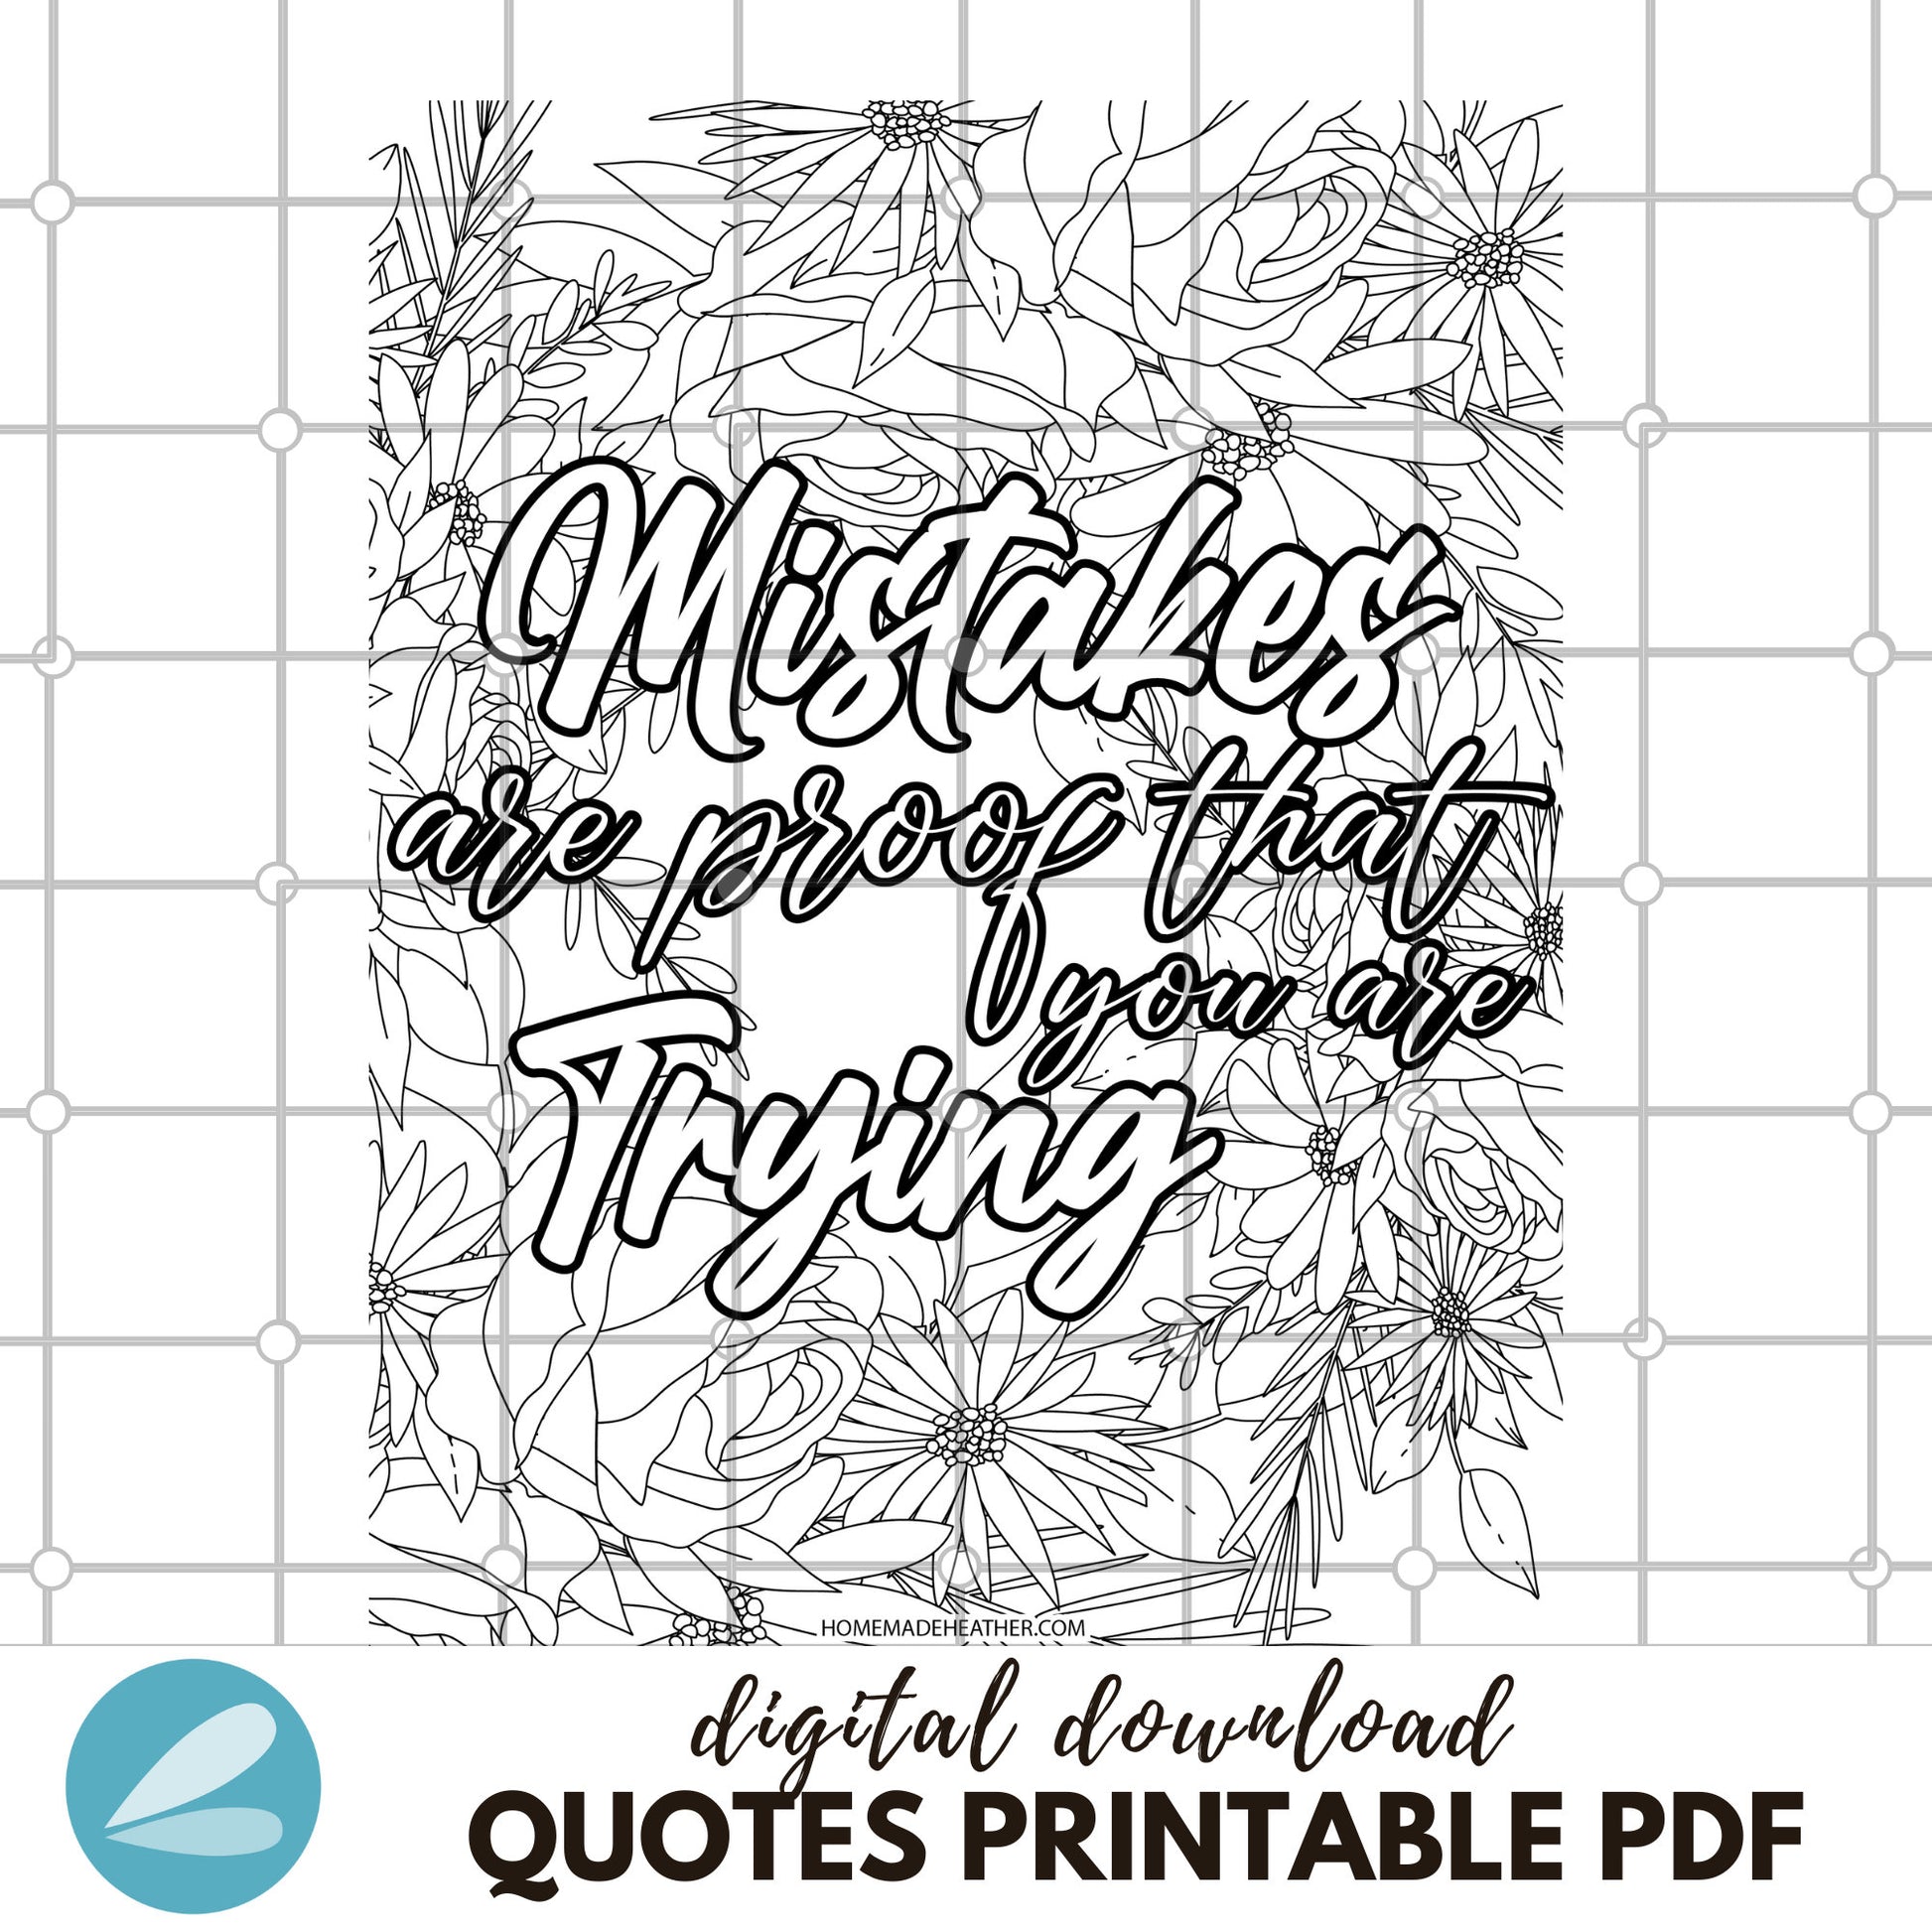 Download Printable Tuesday Motivation Quotes PDF